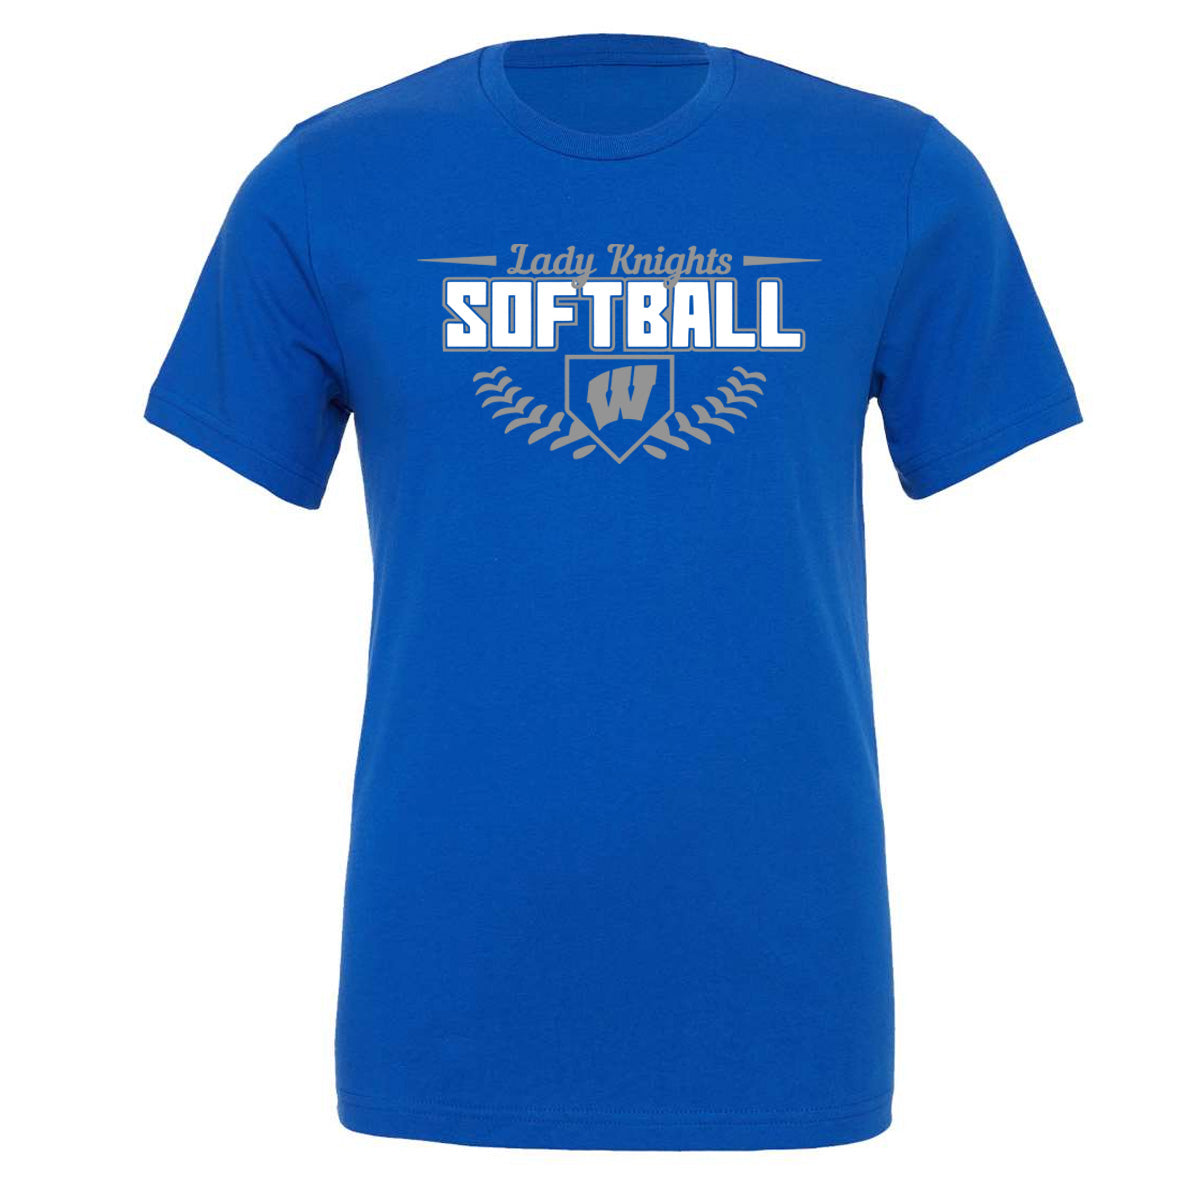 Windsor - Lady Knights Softball Curved Stitches - True Royal DriFit Tee (ST350) - Southern Grace Creations